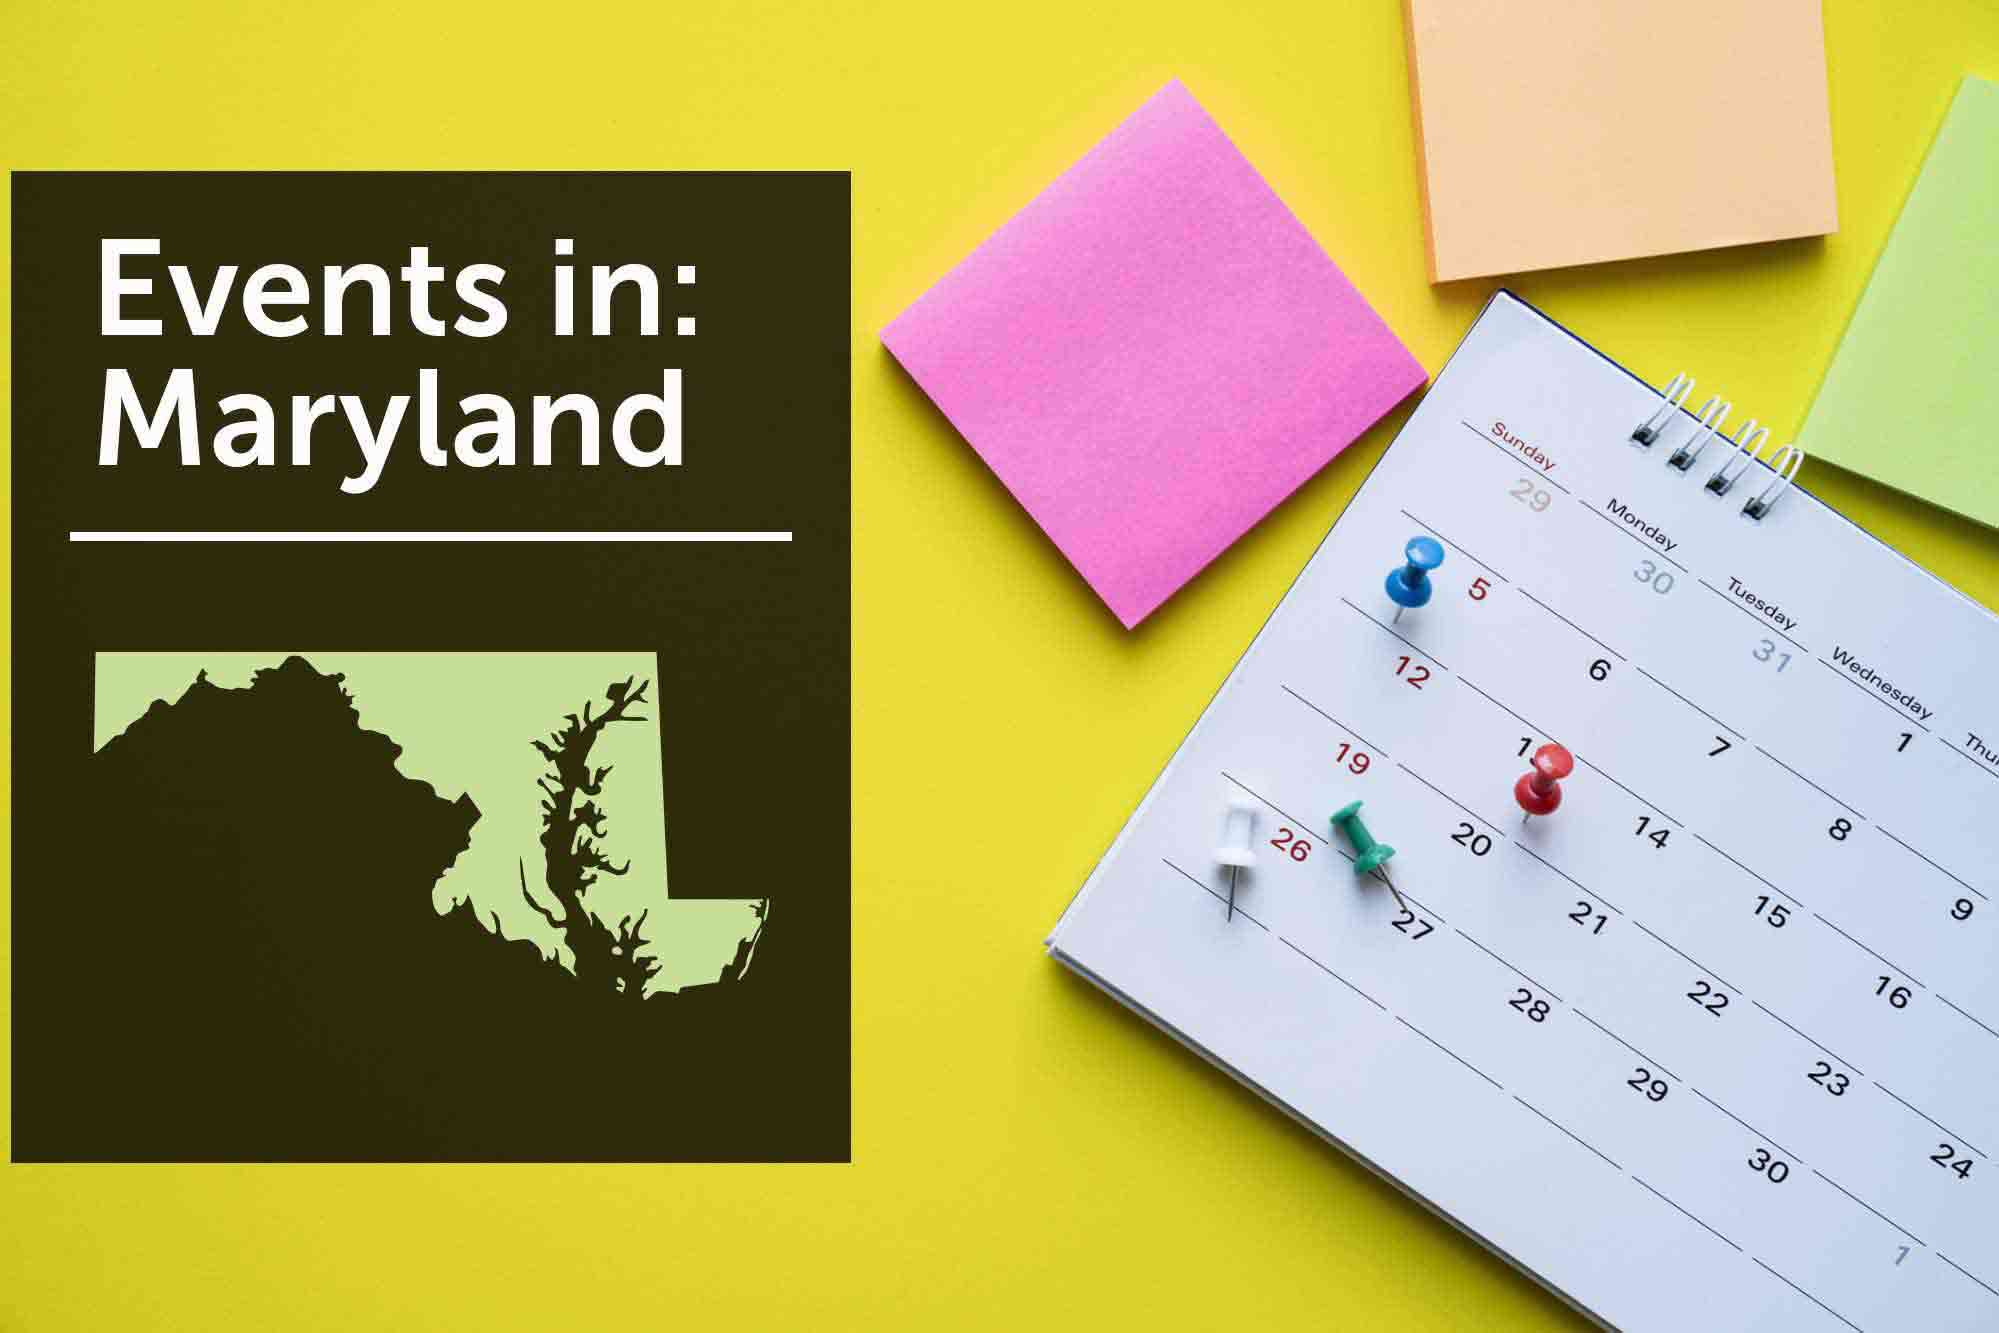 Women's business events in Maryland